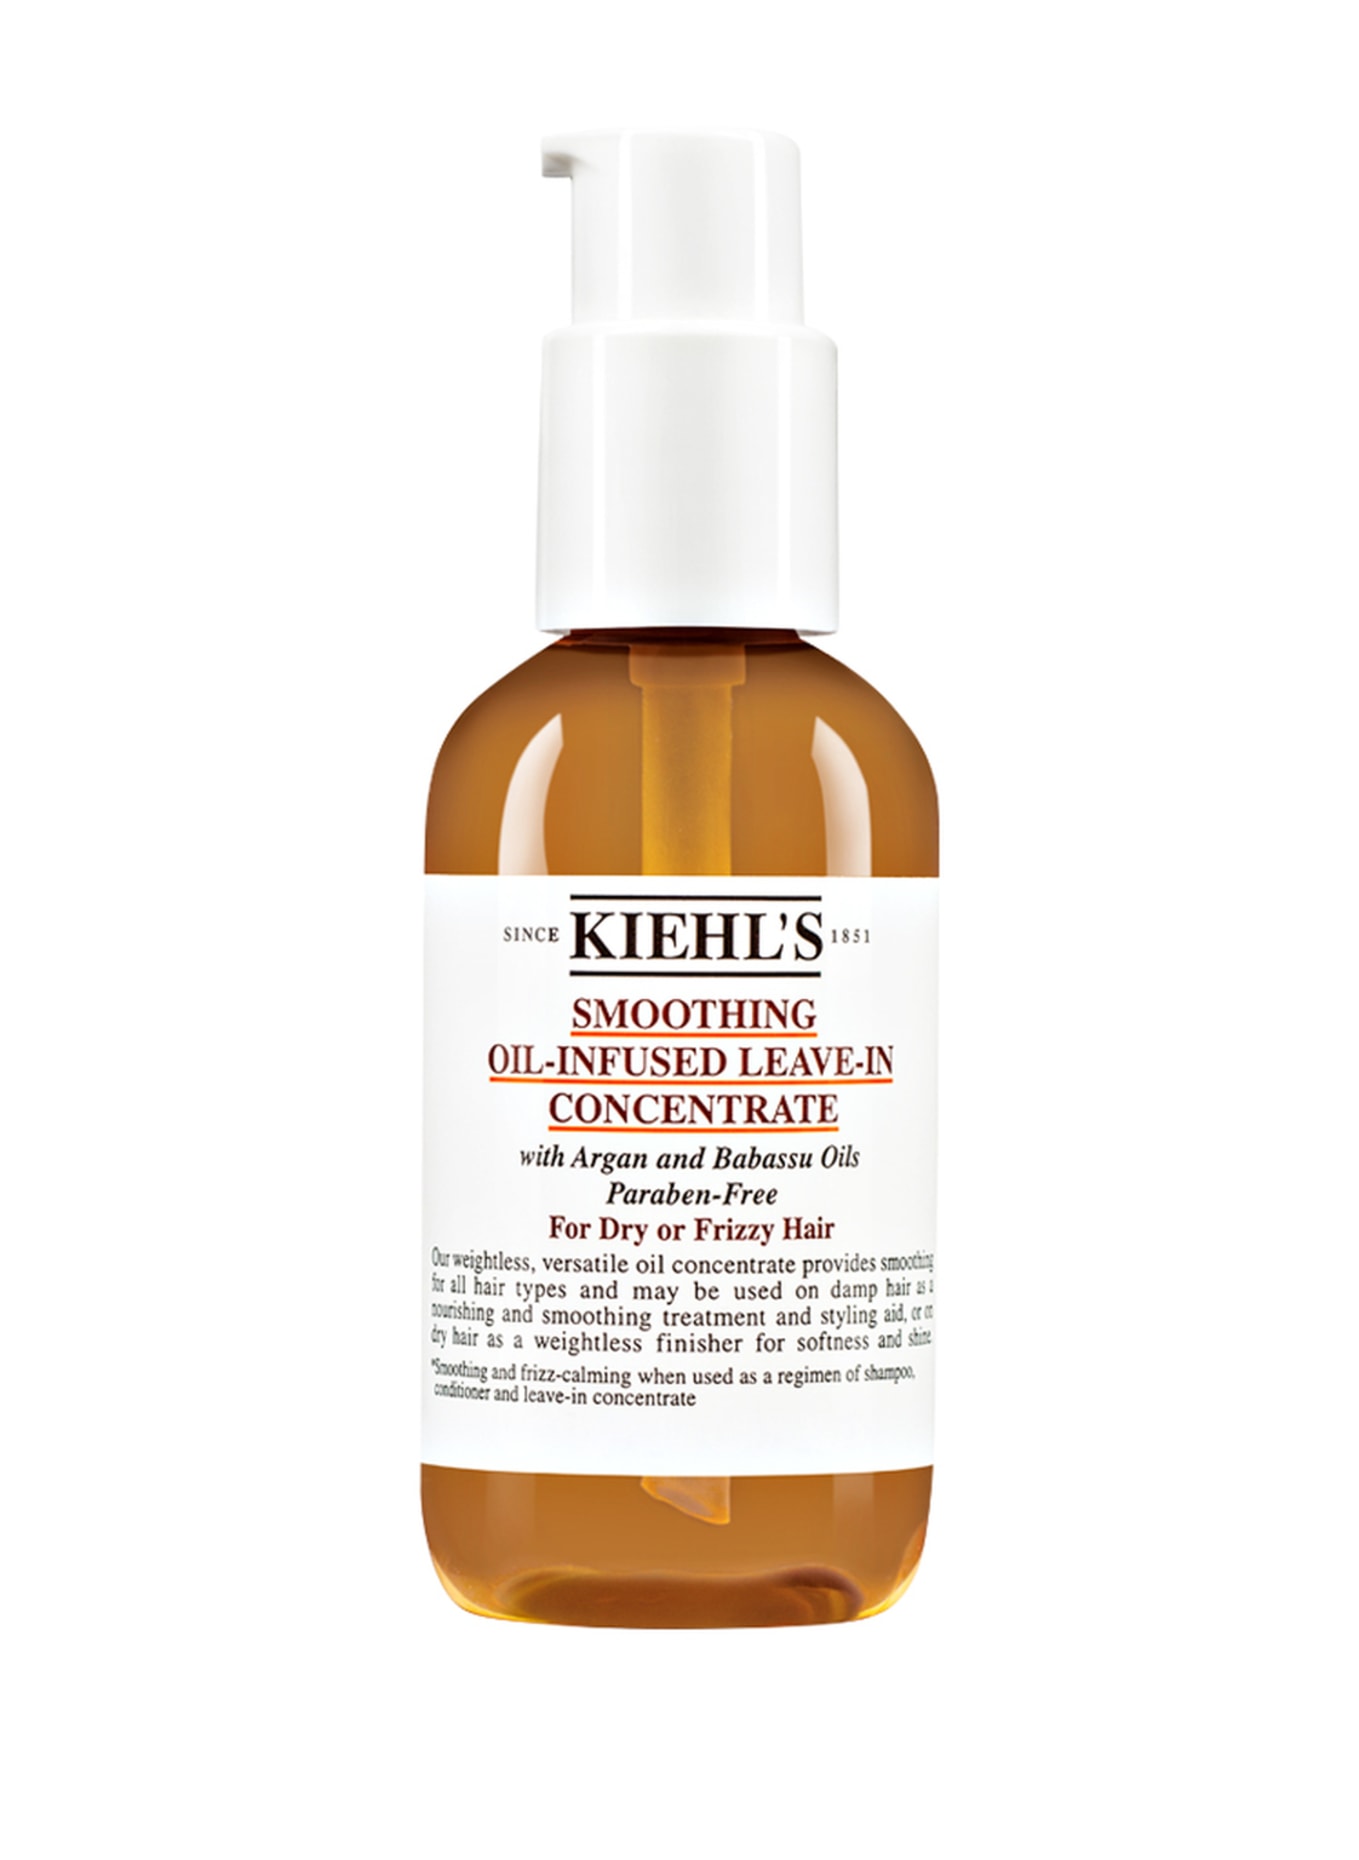 Kiehl's SMOOTHING OIL-INFUSED LEAVE-IN CONCENTRATE (Bild 1)